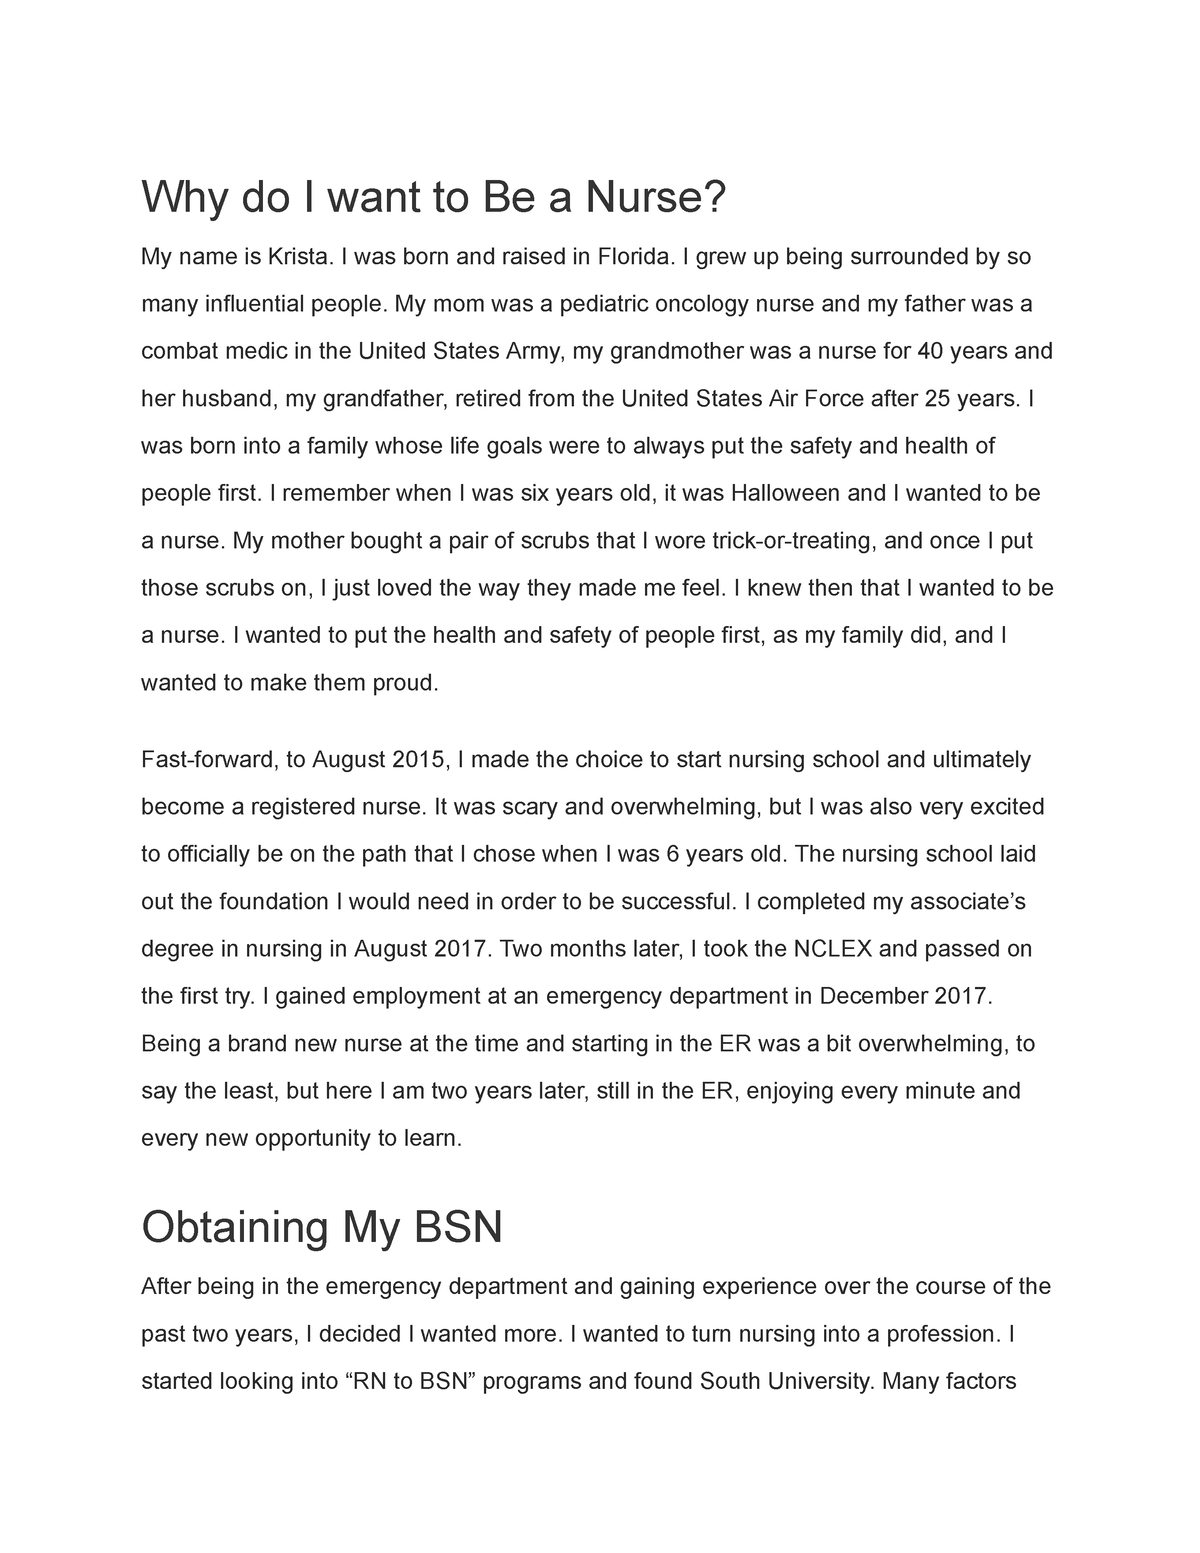 why do you want to be nurse essay